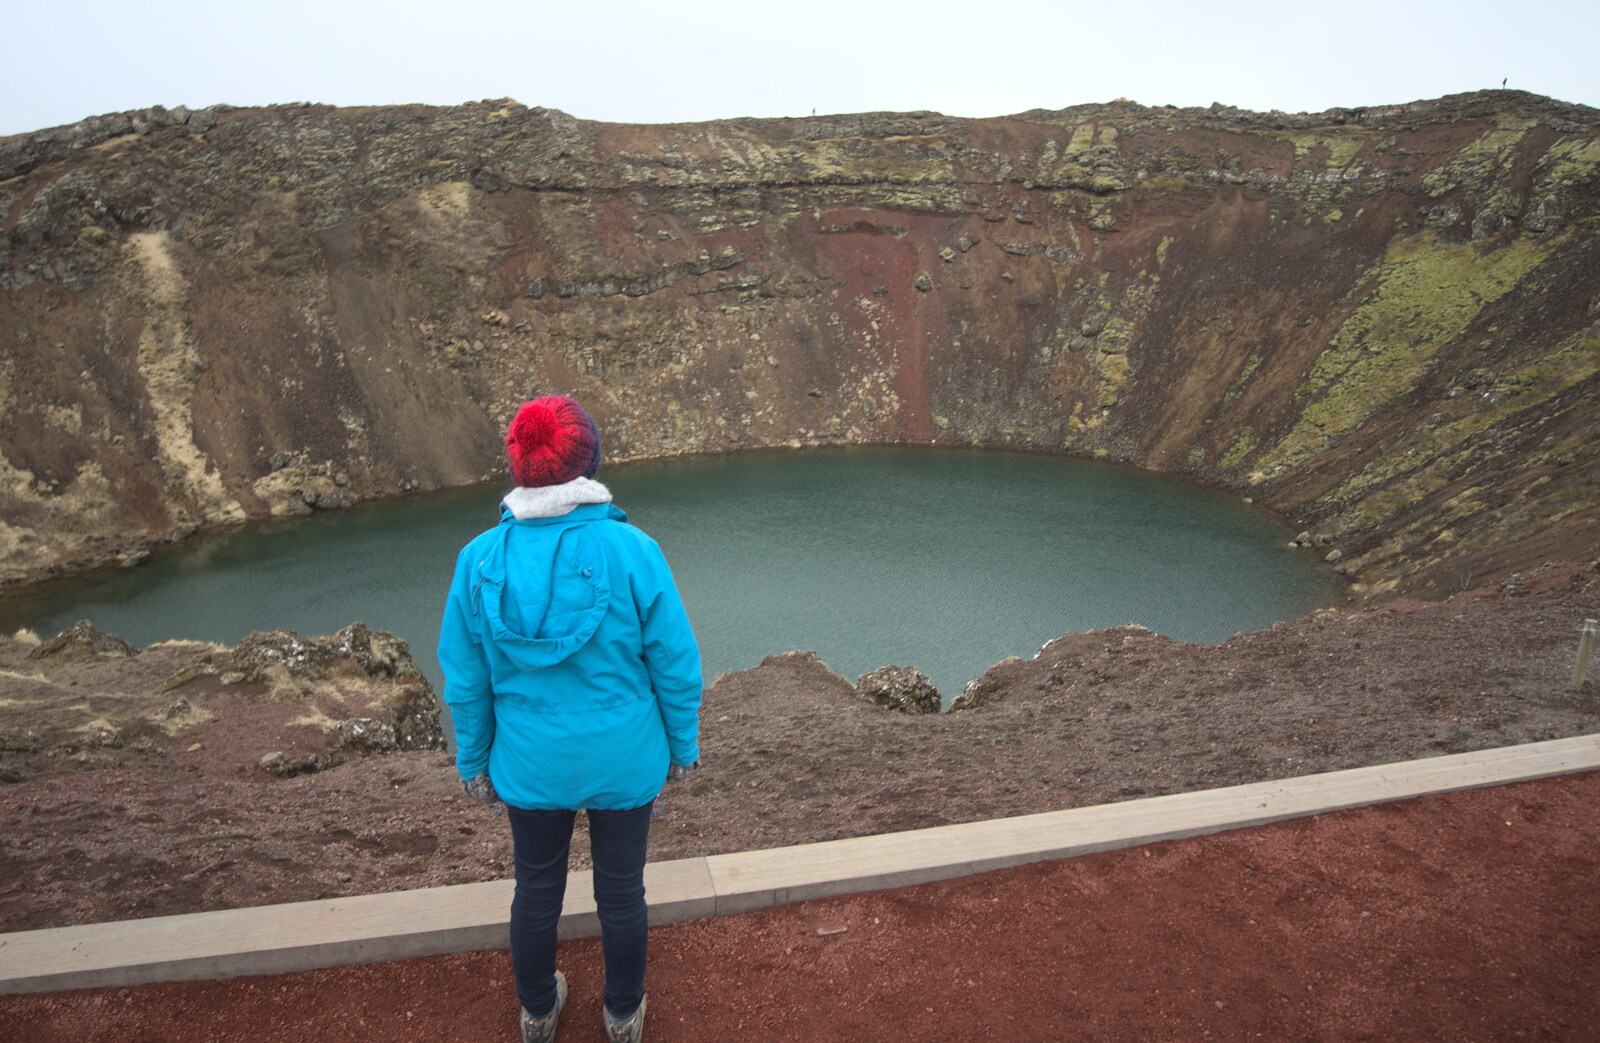 Isobel looks at the crater lake from The Golden Circle of Ísland, Iceland - 22nd April 2017